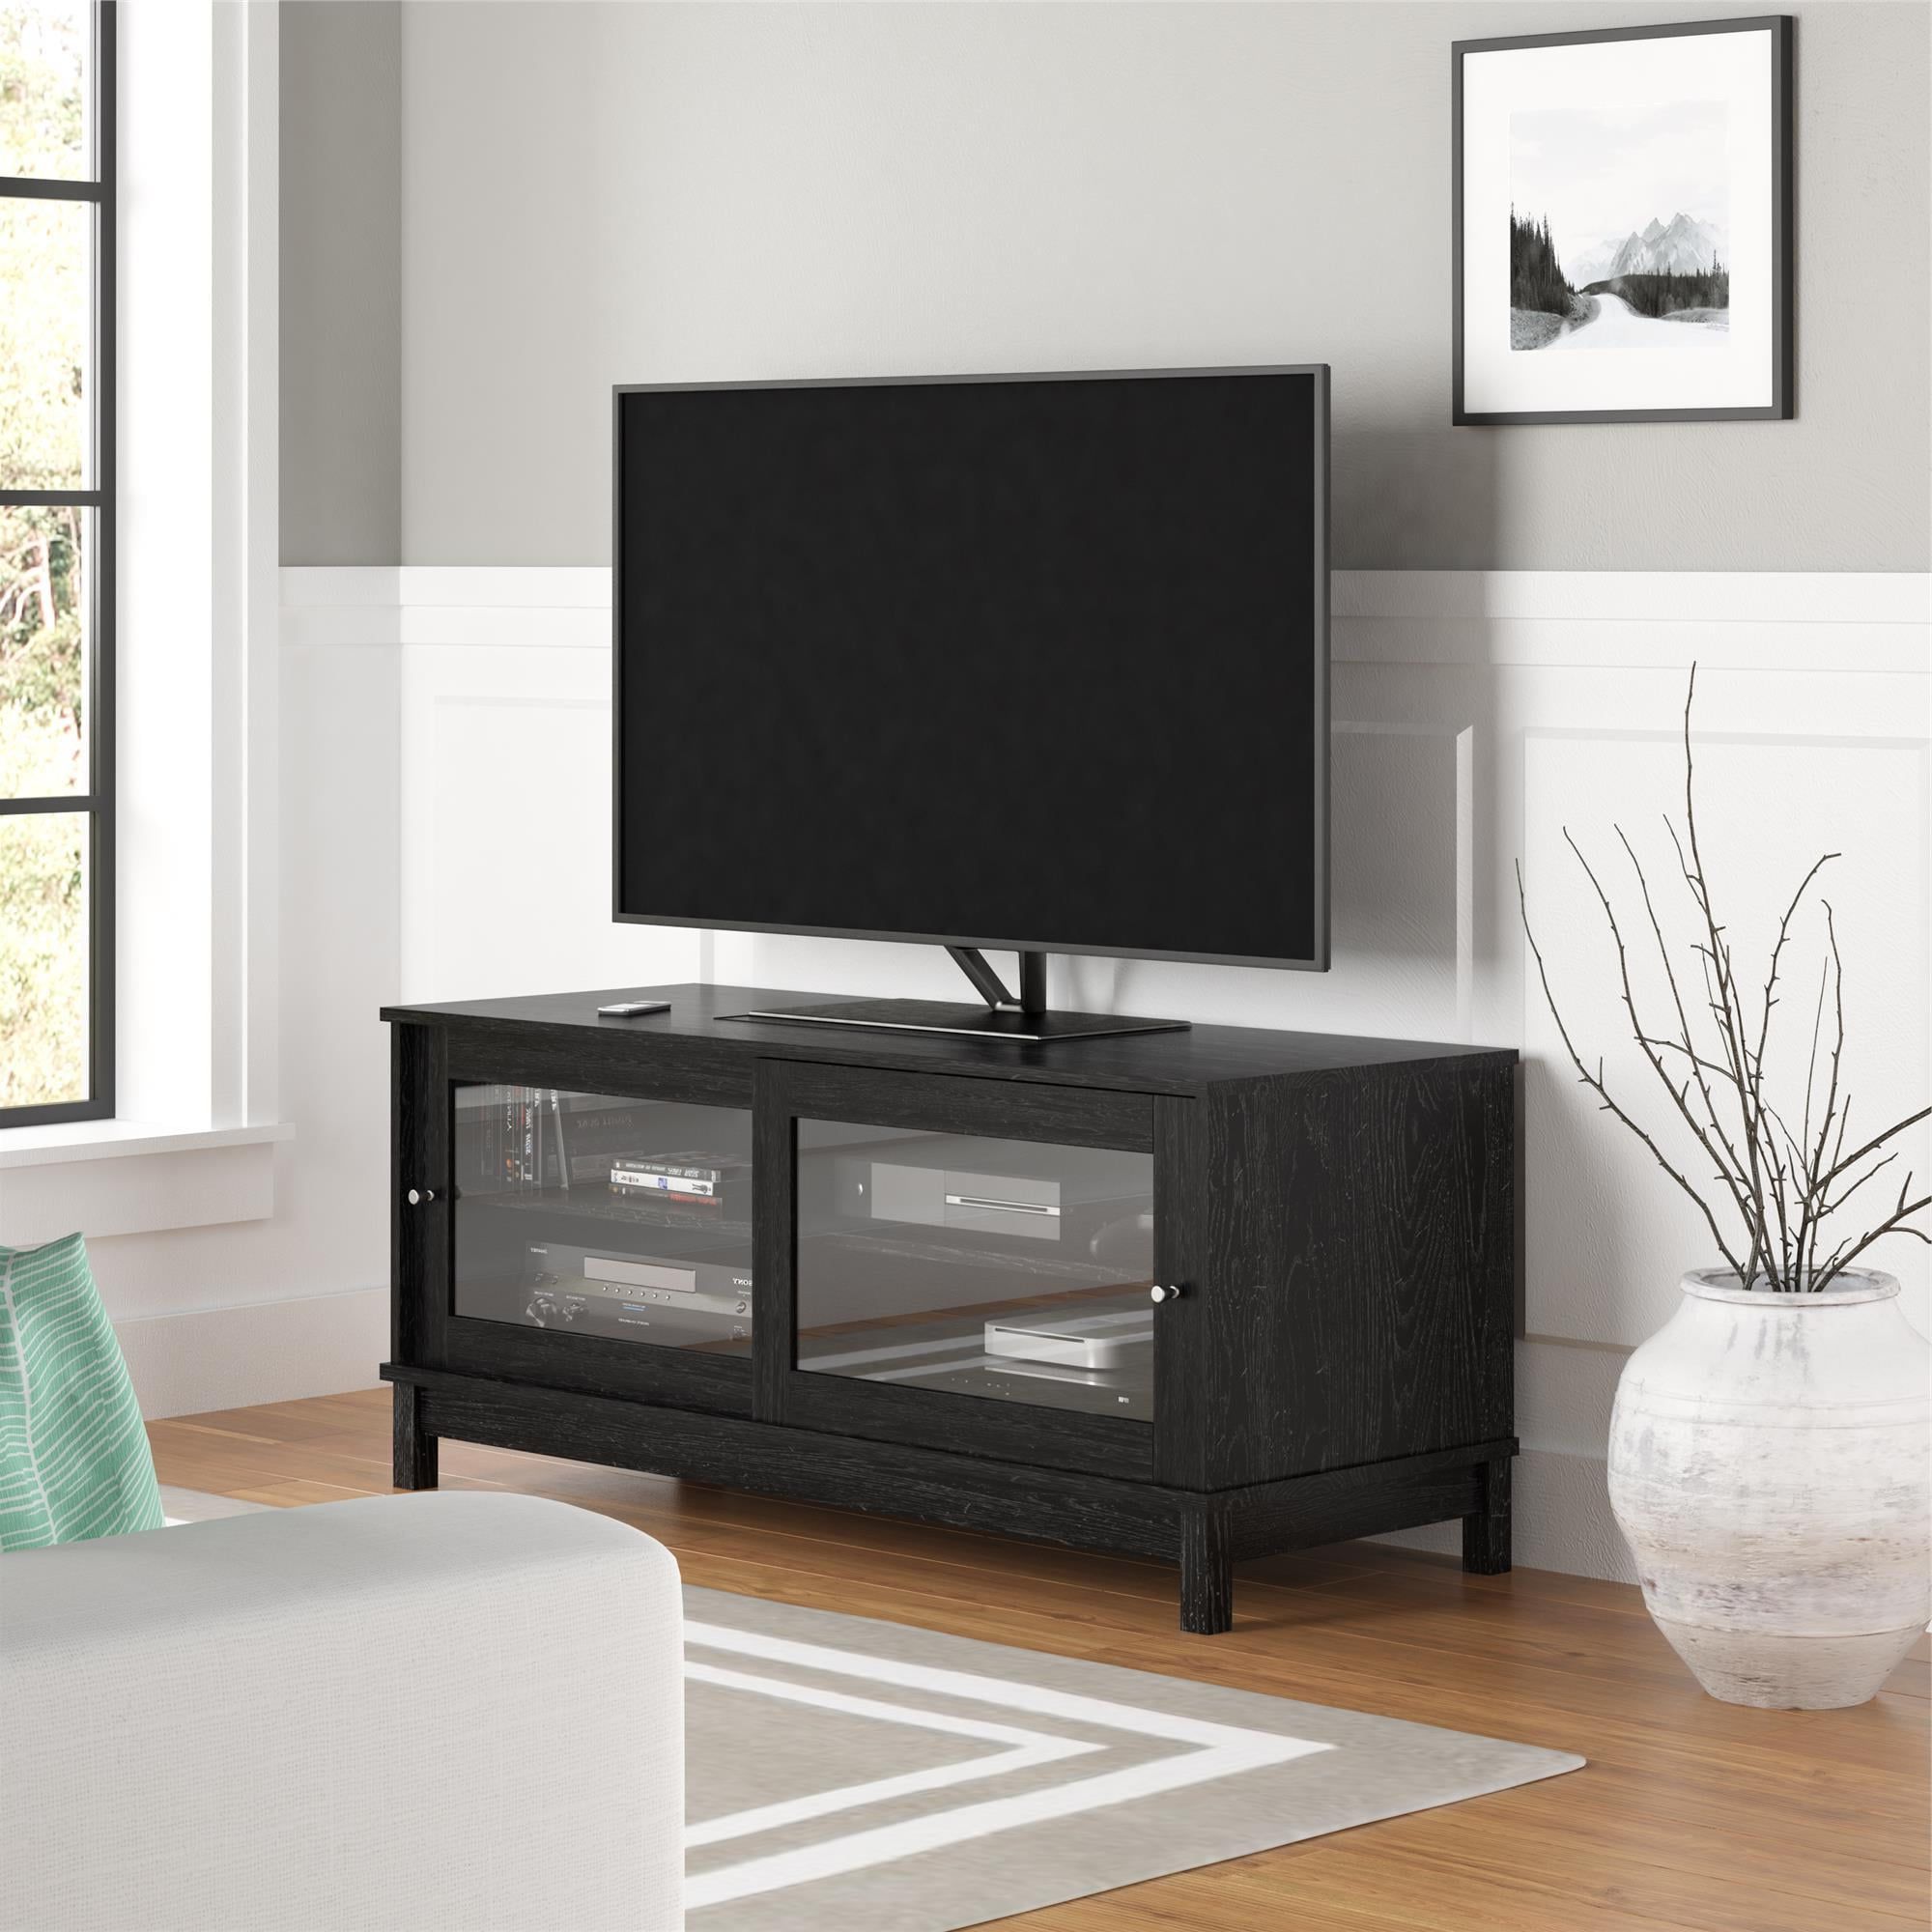 Well Liked Mainstays Tv Stand For Tvs Up To 55", Multiple Finishes – Black Inside Dual Use Storage Cabinet Tv Stands (View 6 of 15)